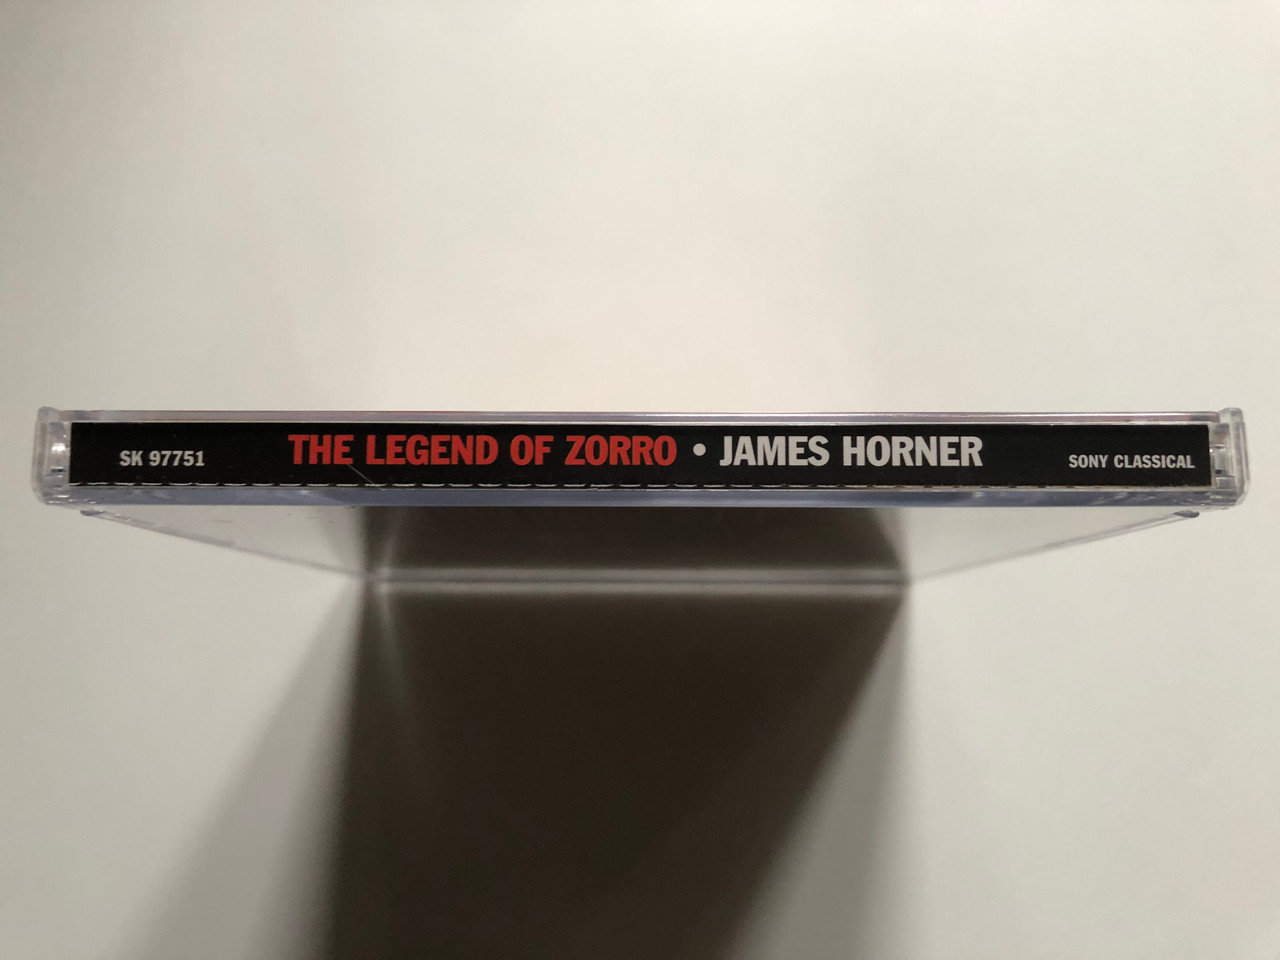 https://cdn11.bigcommerce.com/s-62bdpkt7pb/products/0/images/316423/The_Legend_Of_Zorro_Original_Motion_Picture_Soundtrack_-_Music_Composed_And_Conducted_By_James_Horner_Antonio_Banderas_Catherine_Zeta_Jones_Sony_Classical_Audio_CD_2005_SK_97751_3__99716.1702559462.1280.1280.JPG?c=2